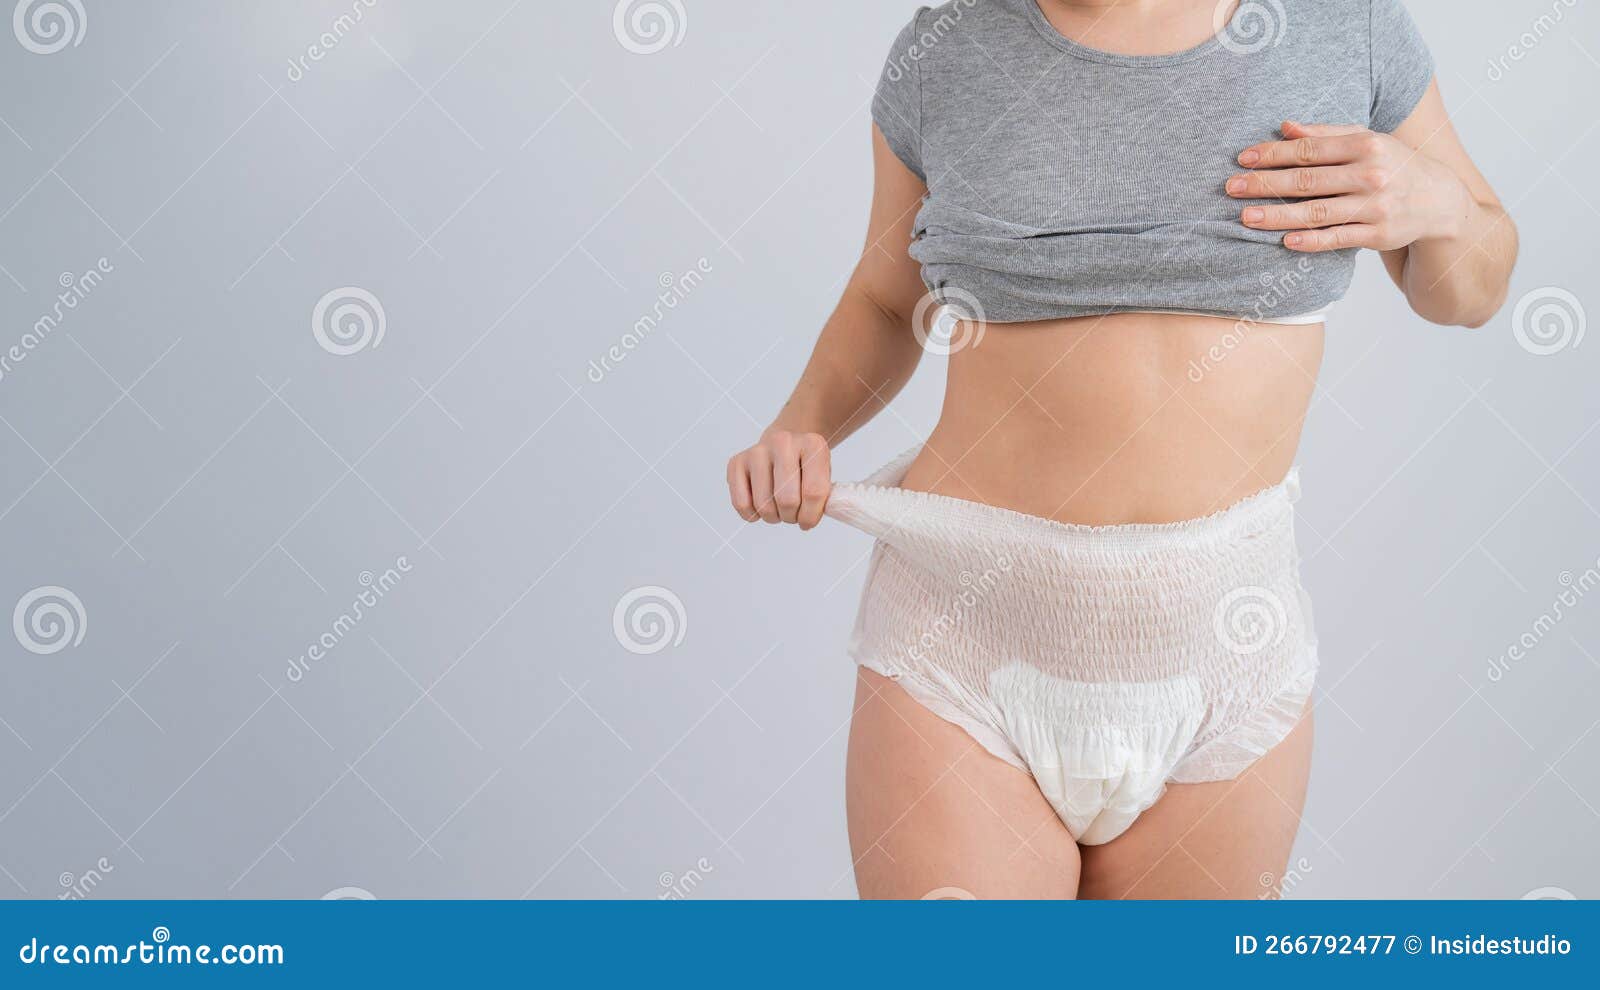 david ionescu recommends pictures of women in diapers pic